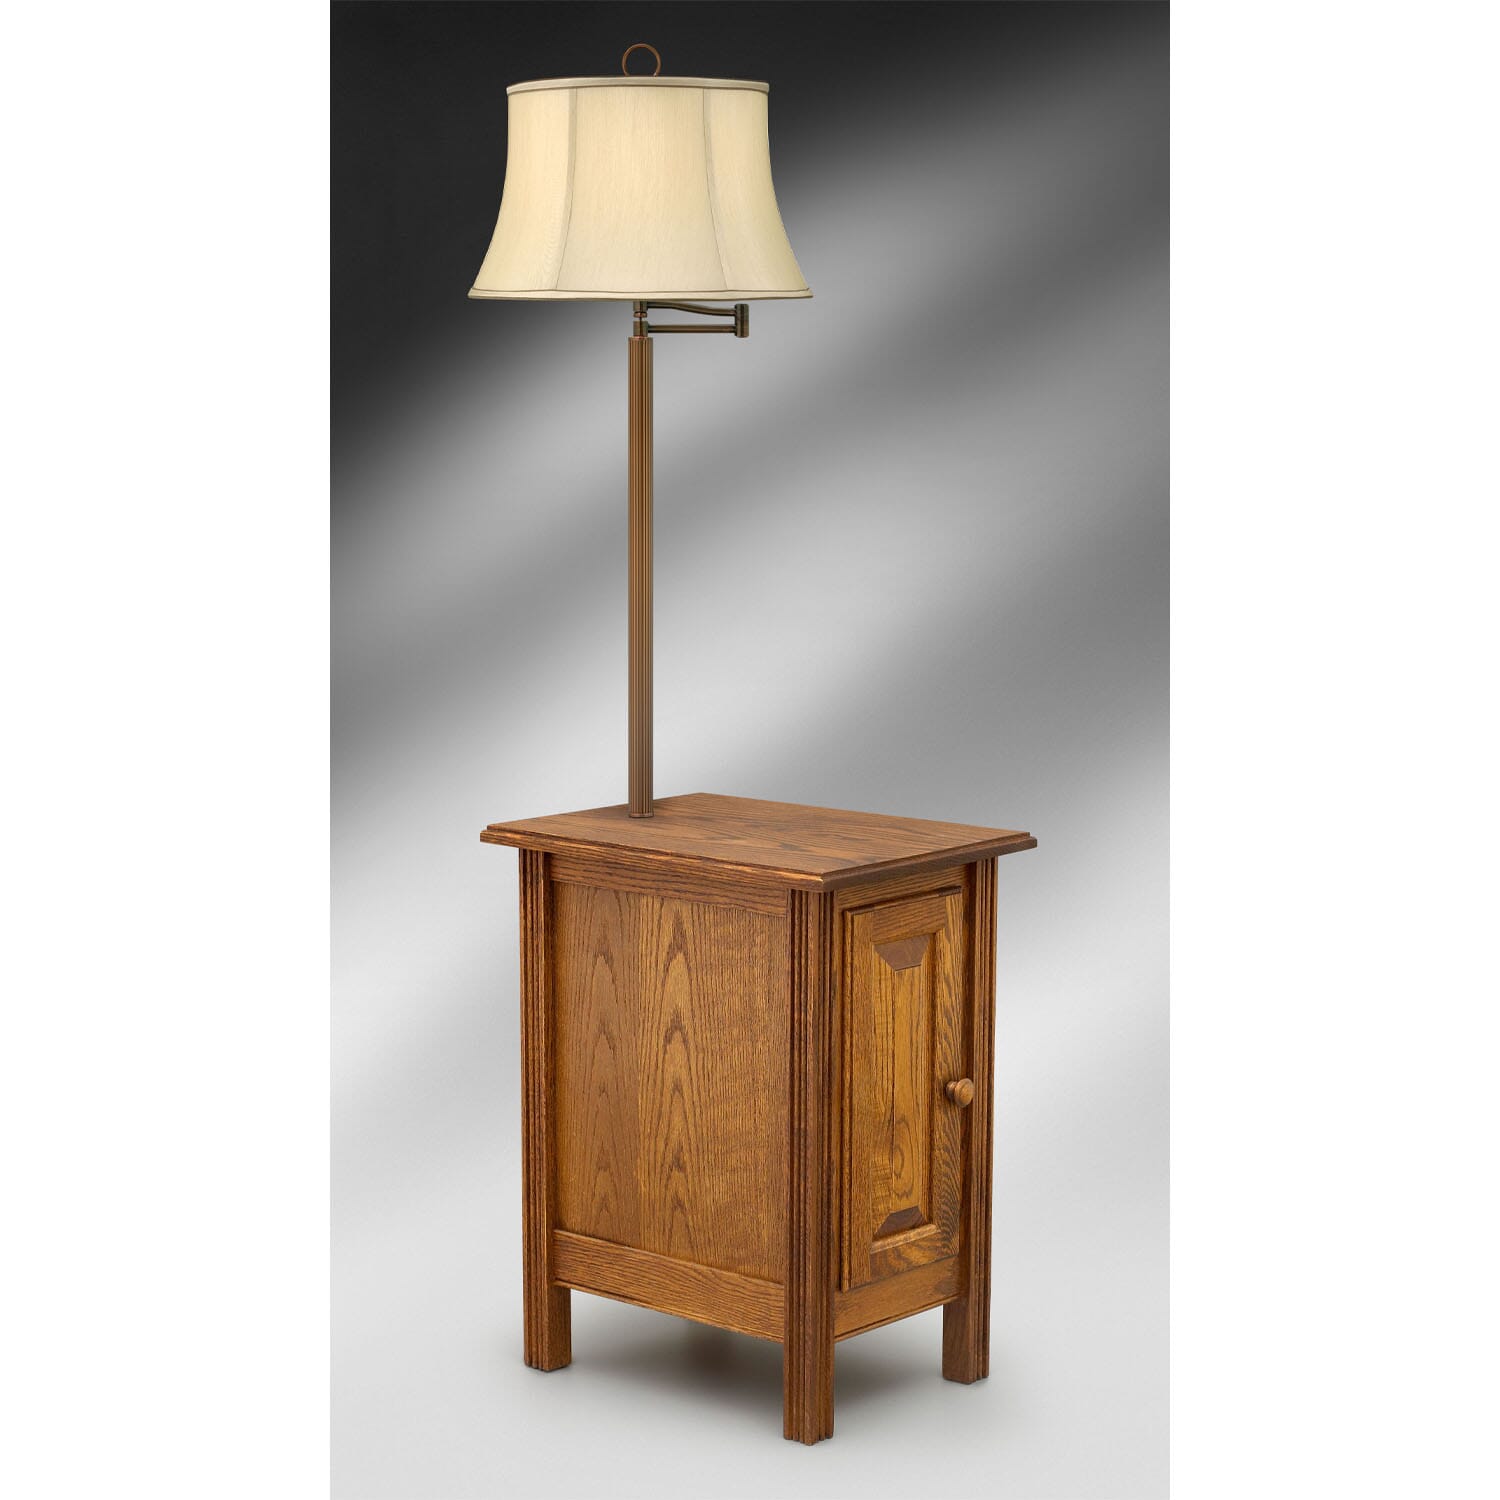 Charm Floor Lamp Lamps Wg R Furniture, Chairside Table With Attached Lamp